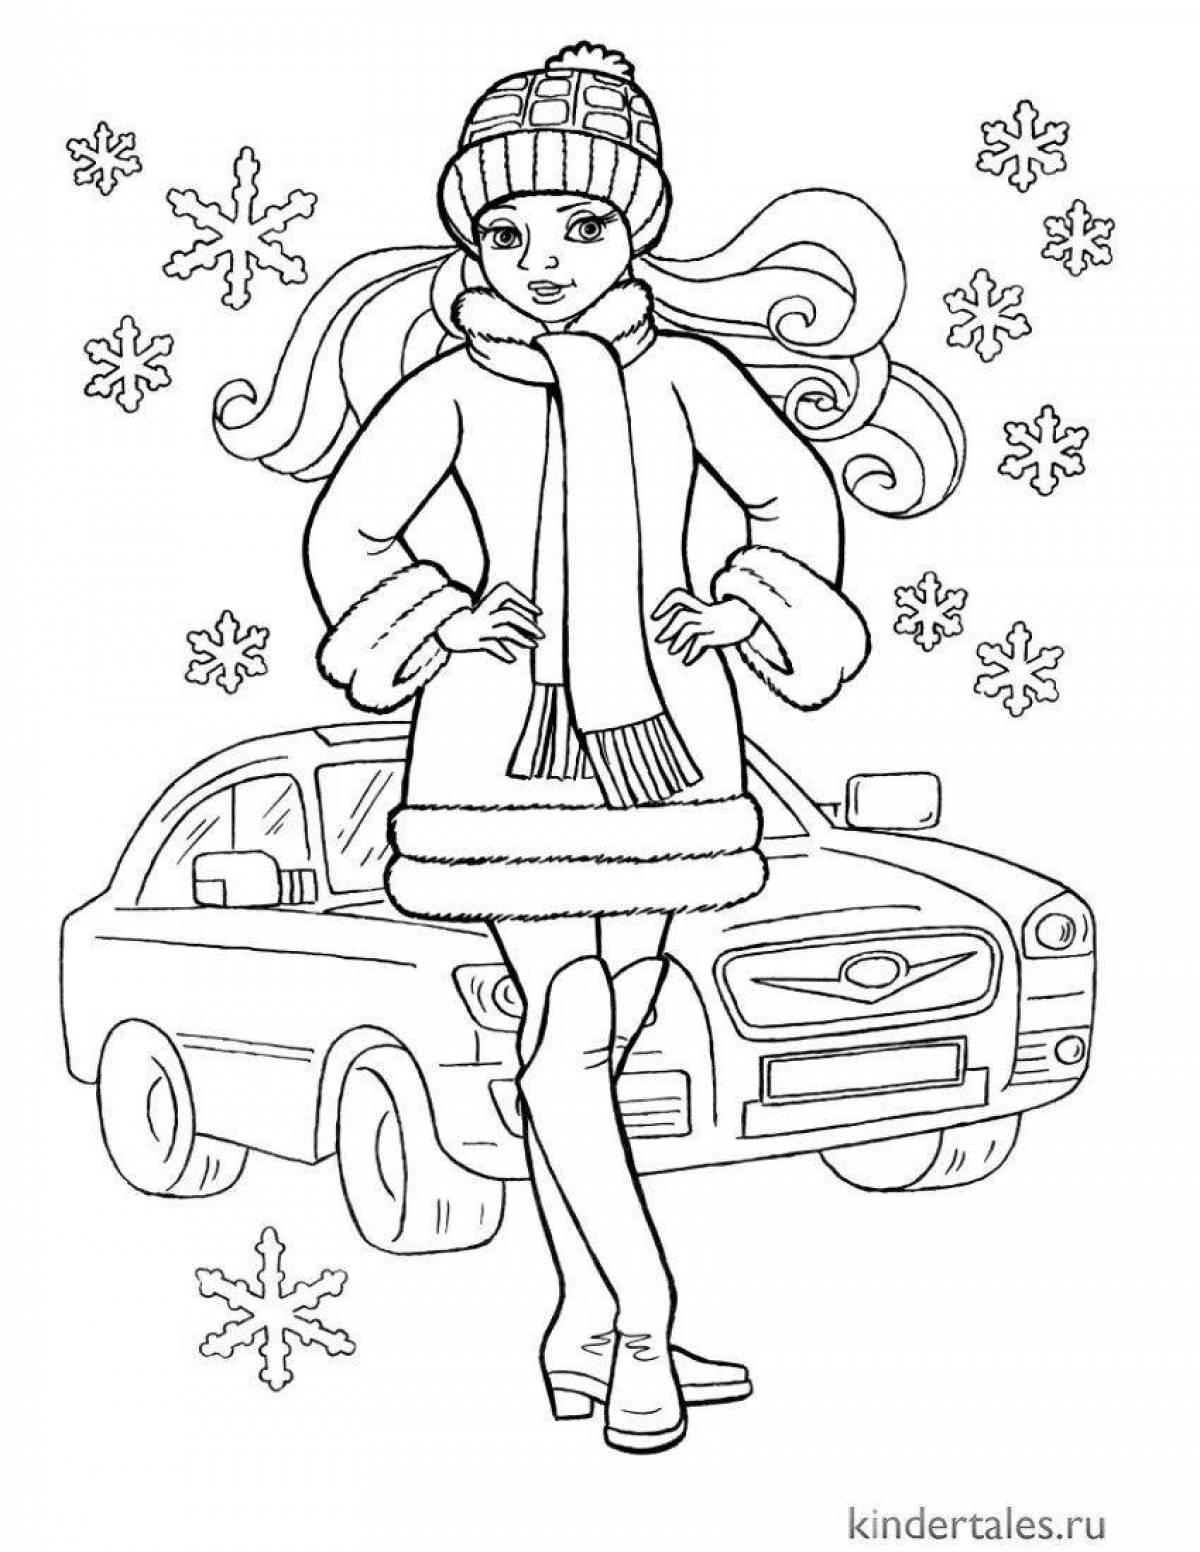 Radiant coloring page doll in winter clothes